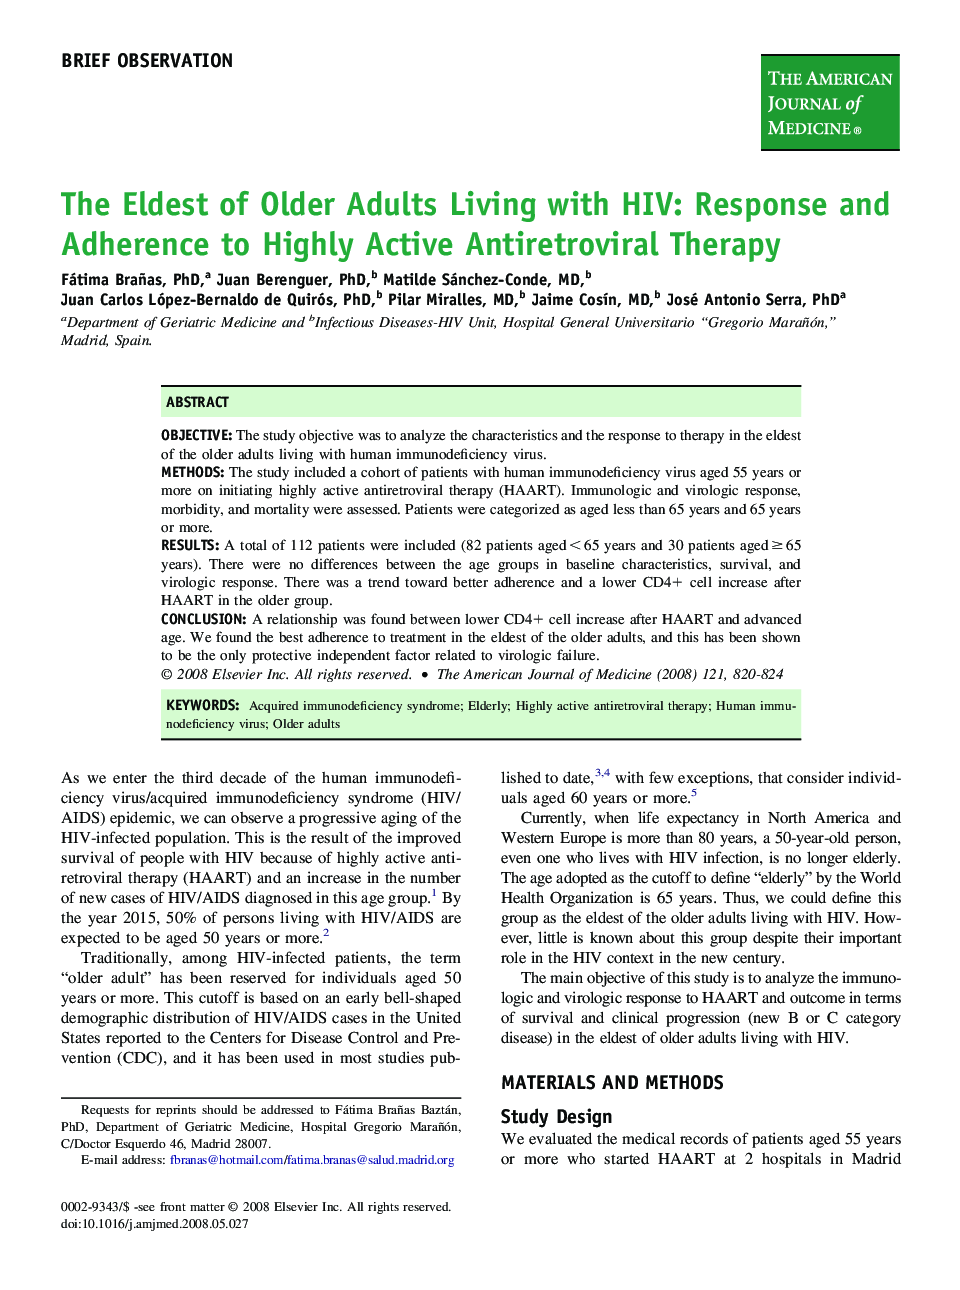 The Eldest of Older Adults Living with HIV: Response and Adherence to Highly Active Antiretroviral Therapy